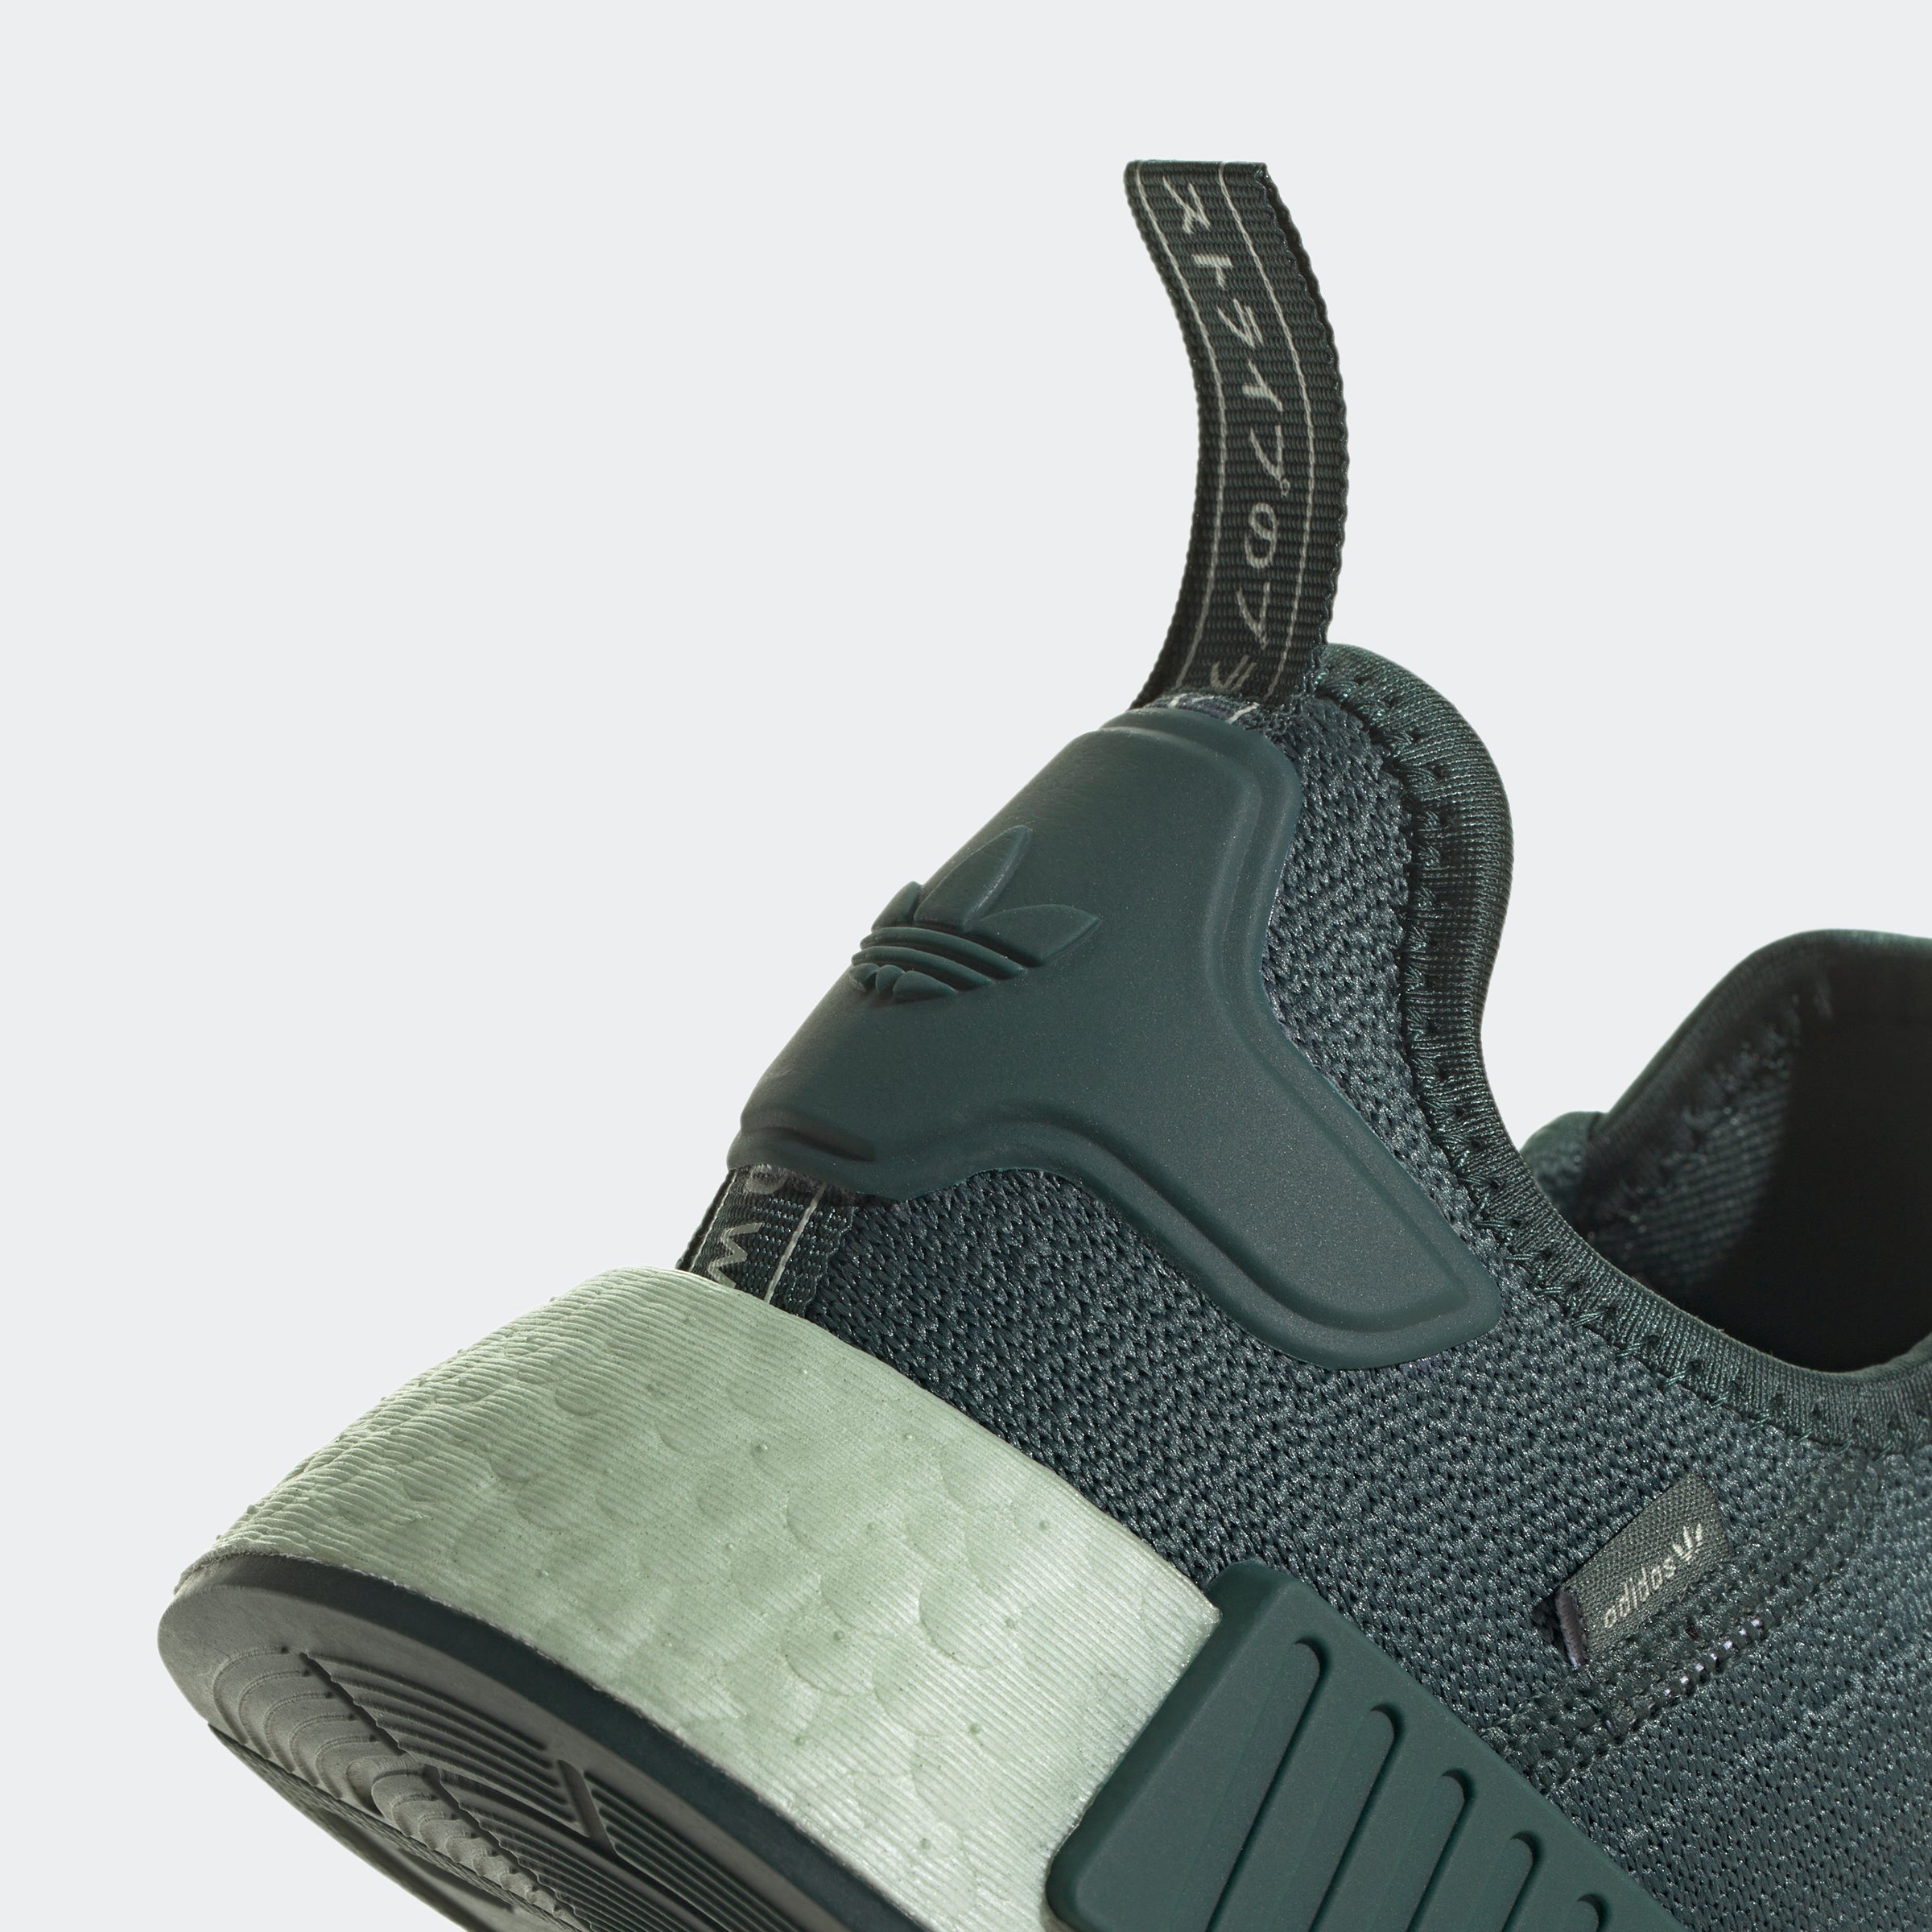 Women's adidas NMD_R1 Shoes Linen GW9477 | Chicago City Sports